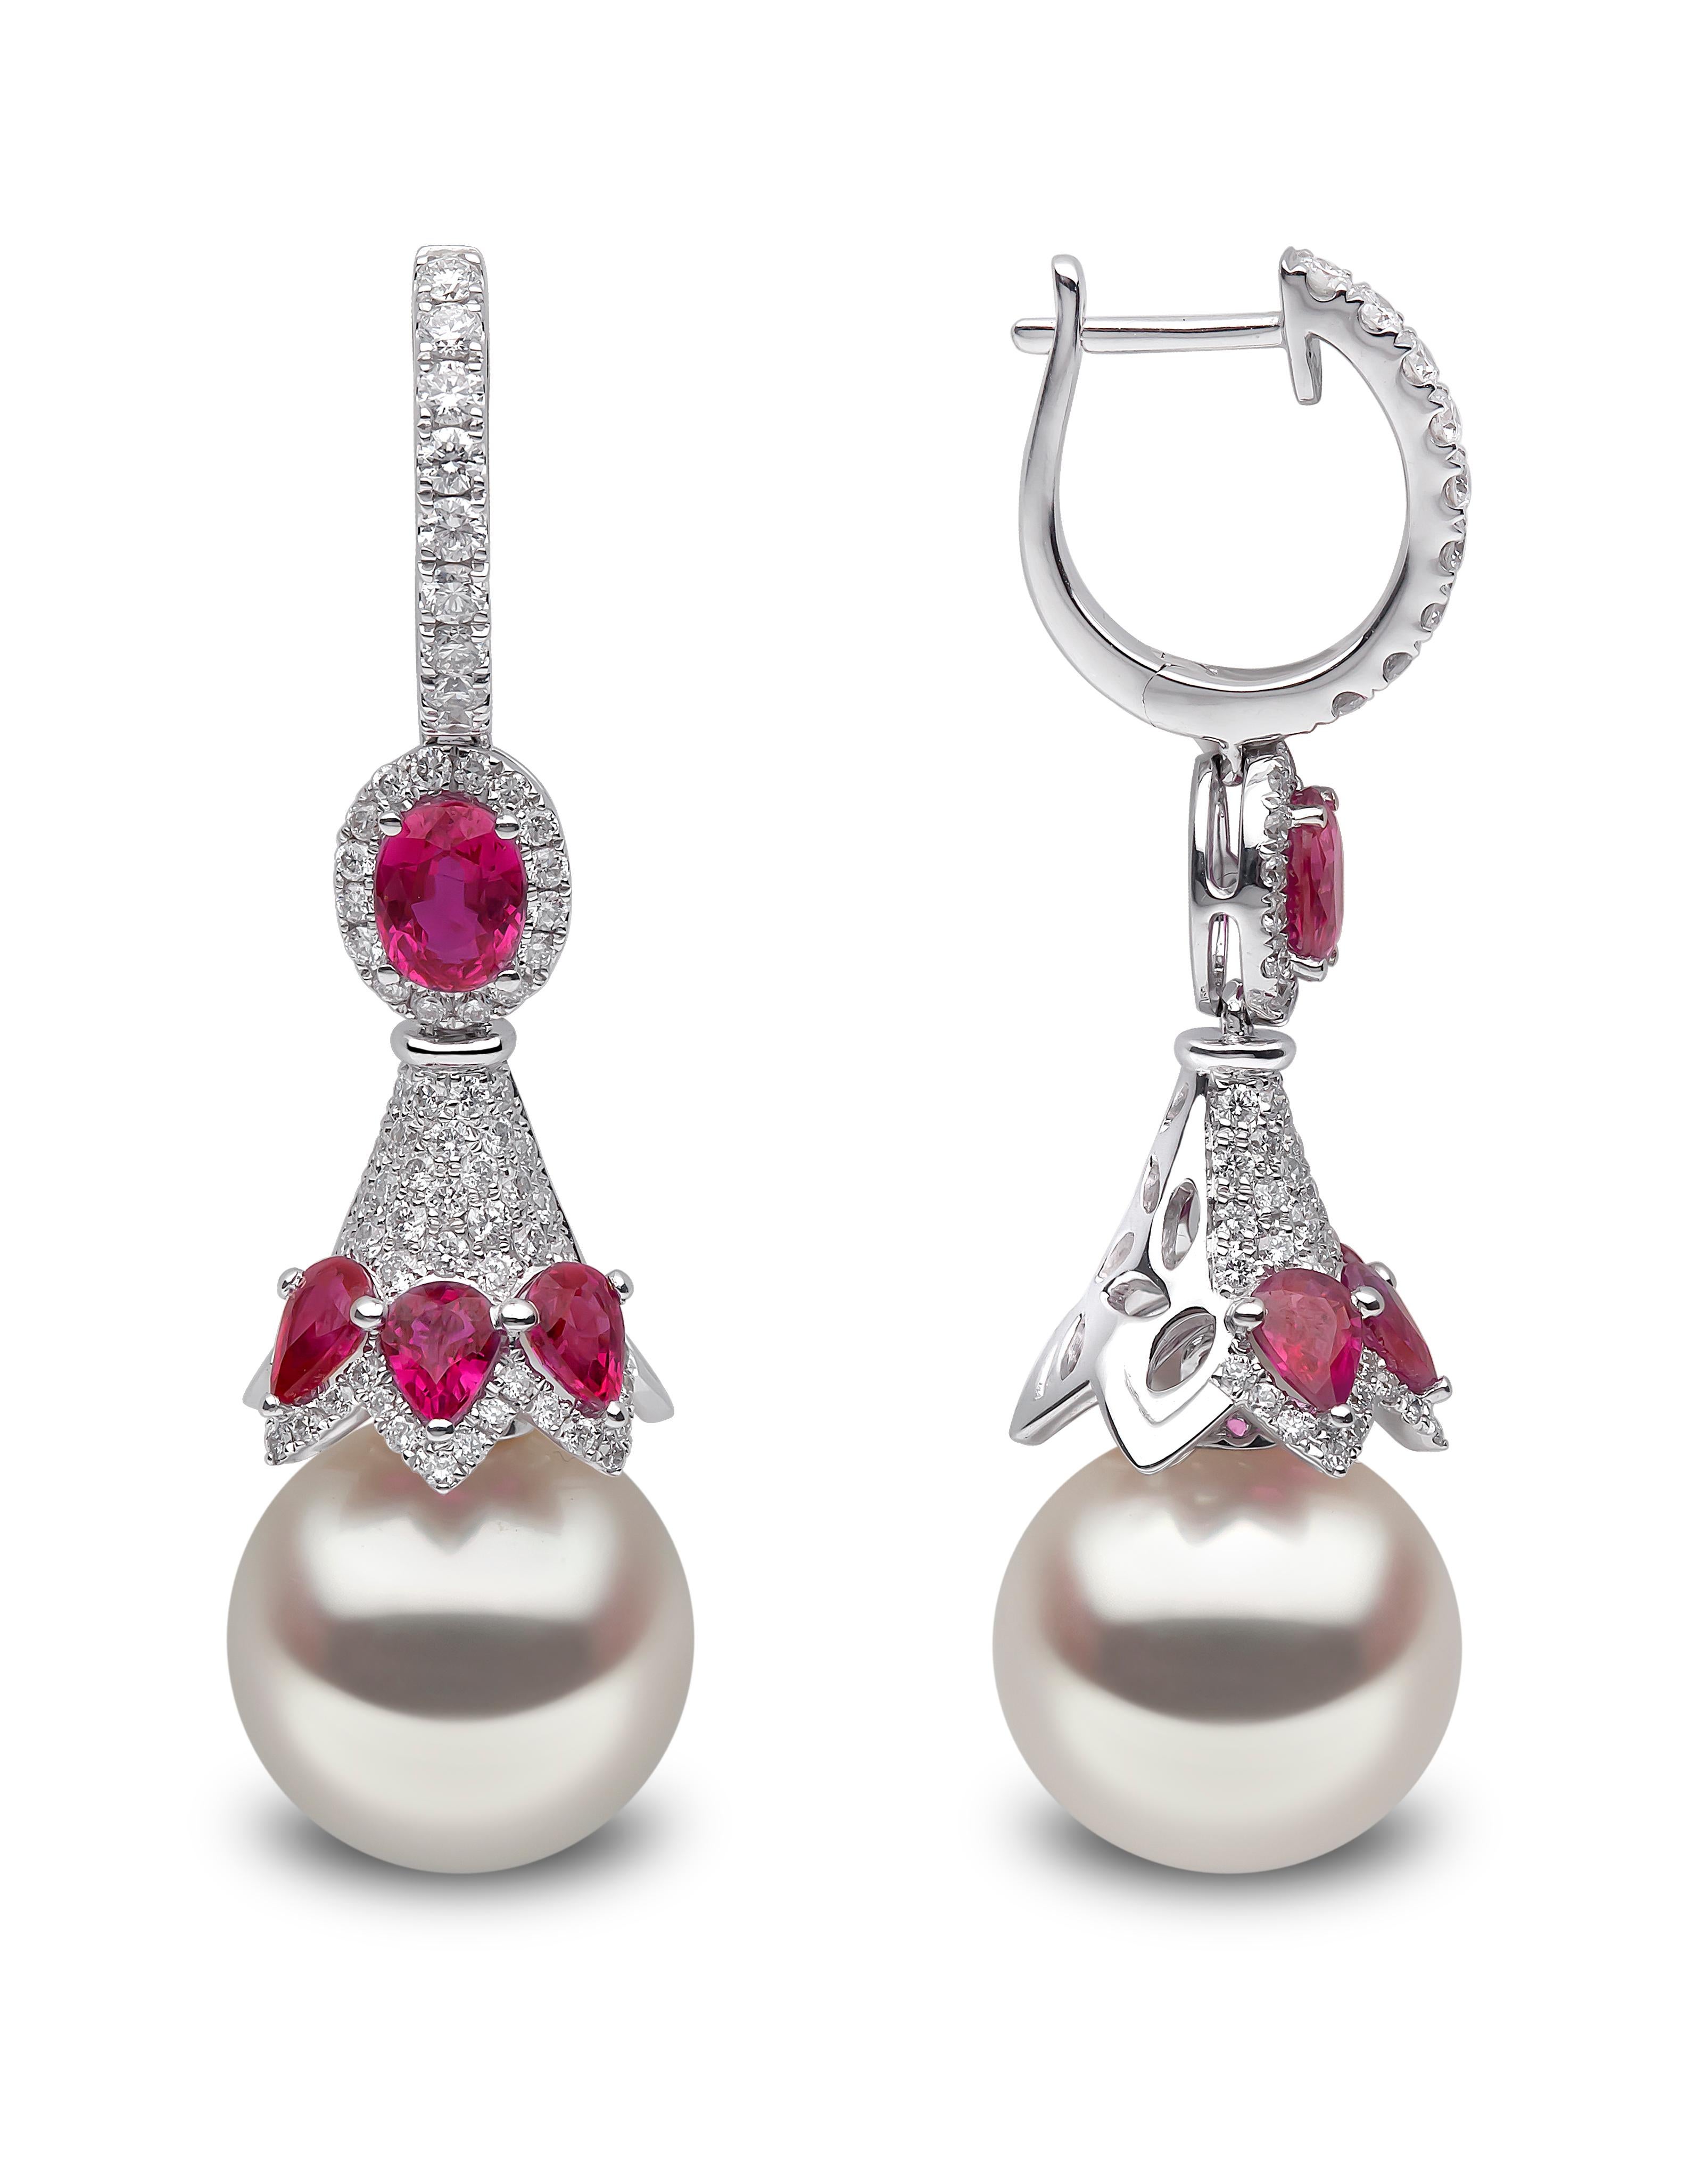 These elegant earrings by Yoko London feature lustrous South Sea pearls beneath an ornate arrangement of diamonds and pearls. Each of our South Sea pearls have been hand-selected and expertly matched in our London atelier due to their superior